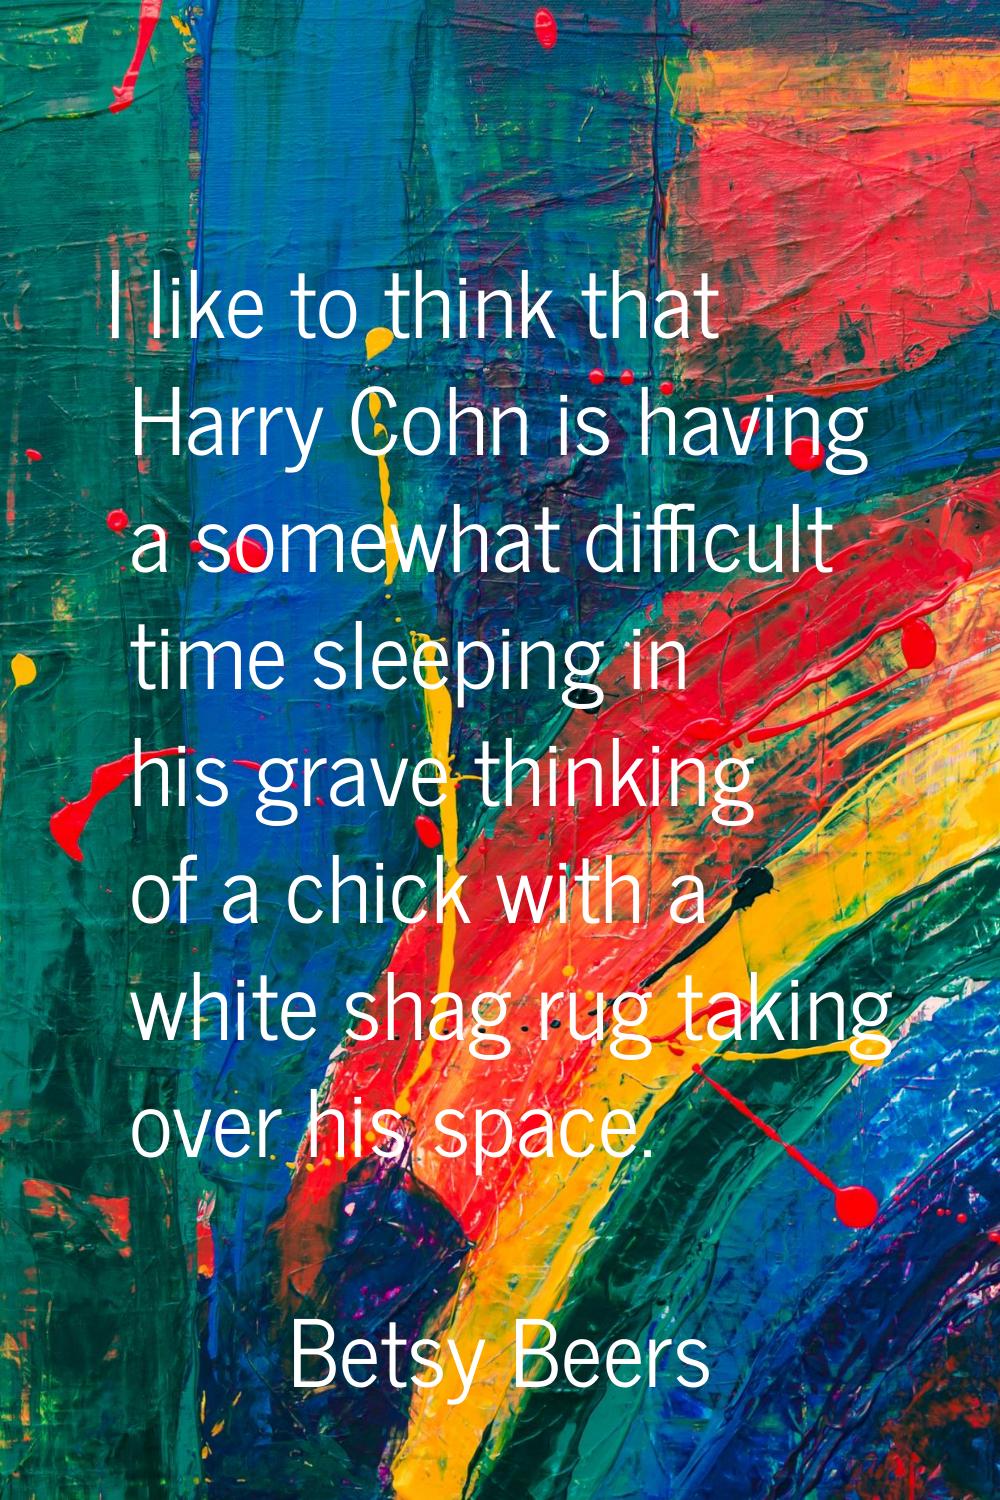 I like to think that Harry Cohn is having a somewhat difficult time sleeping in his grave thinking 